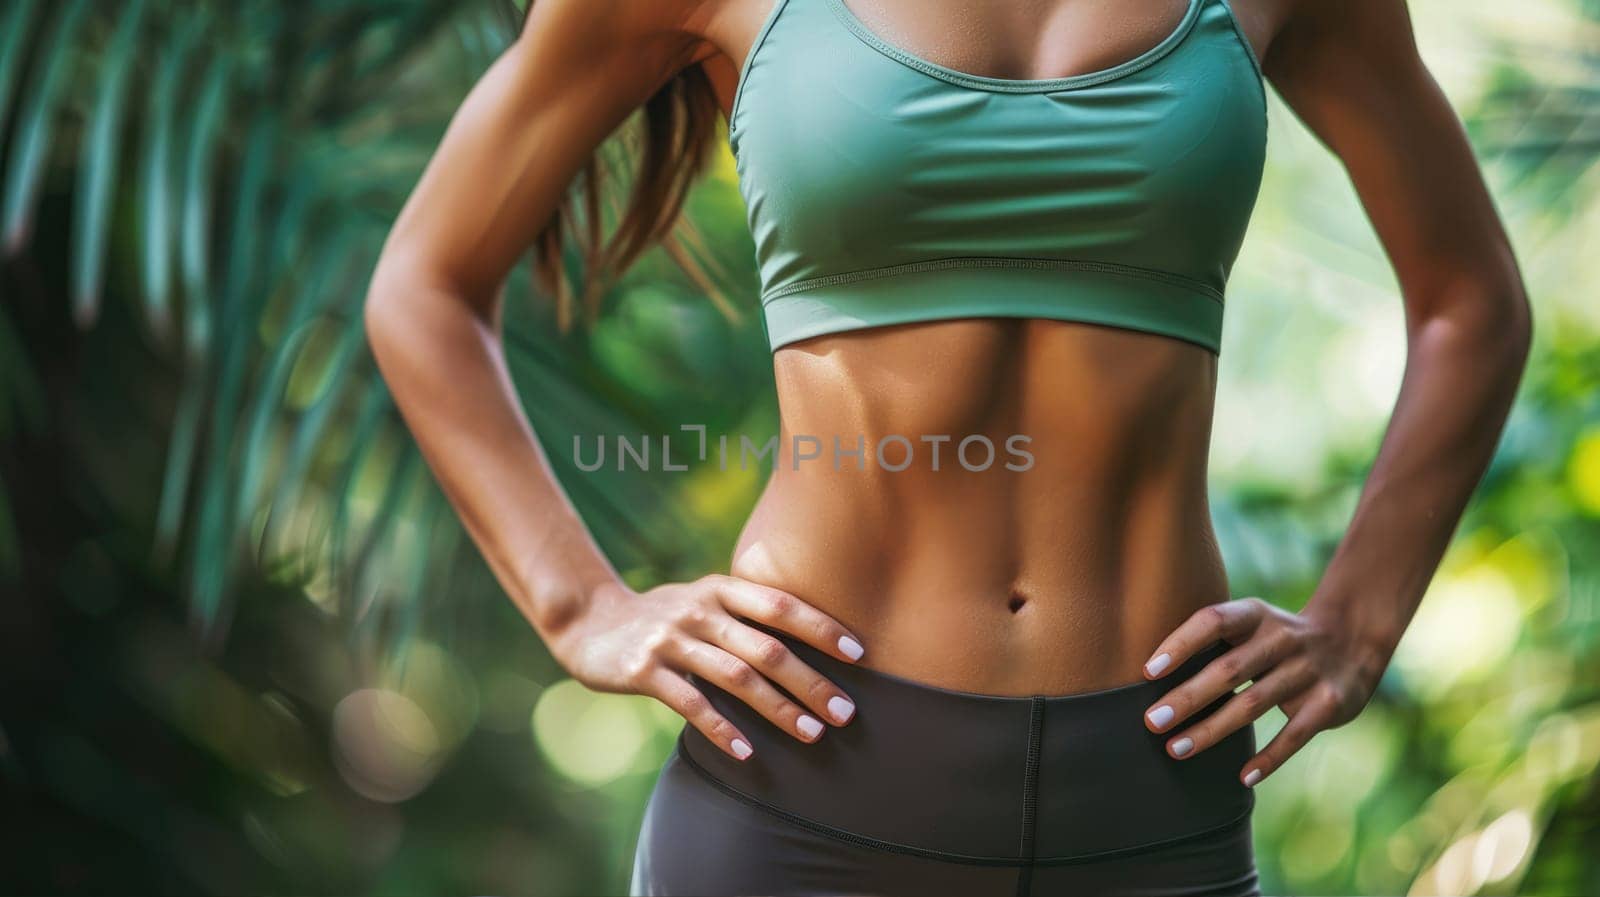 Abdominal muscles of fit fitness woman in green top AI